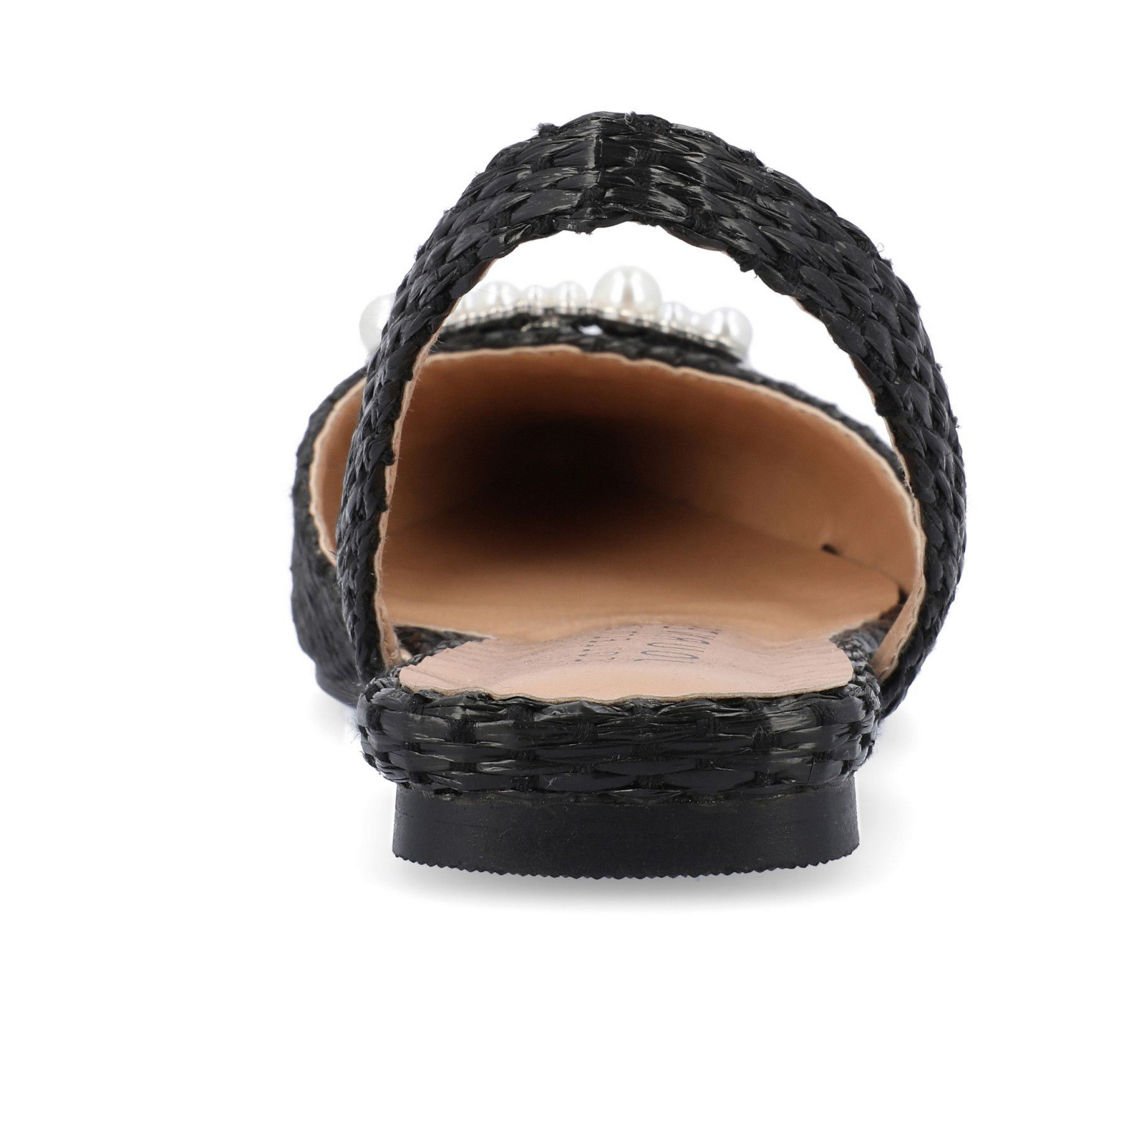 Journee Collection Women's Medium and Wide Width Hannae Flats - Image 3 of 5